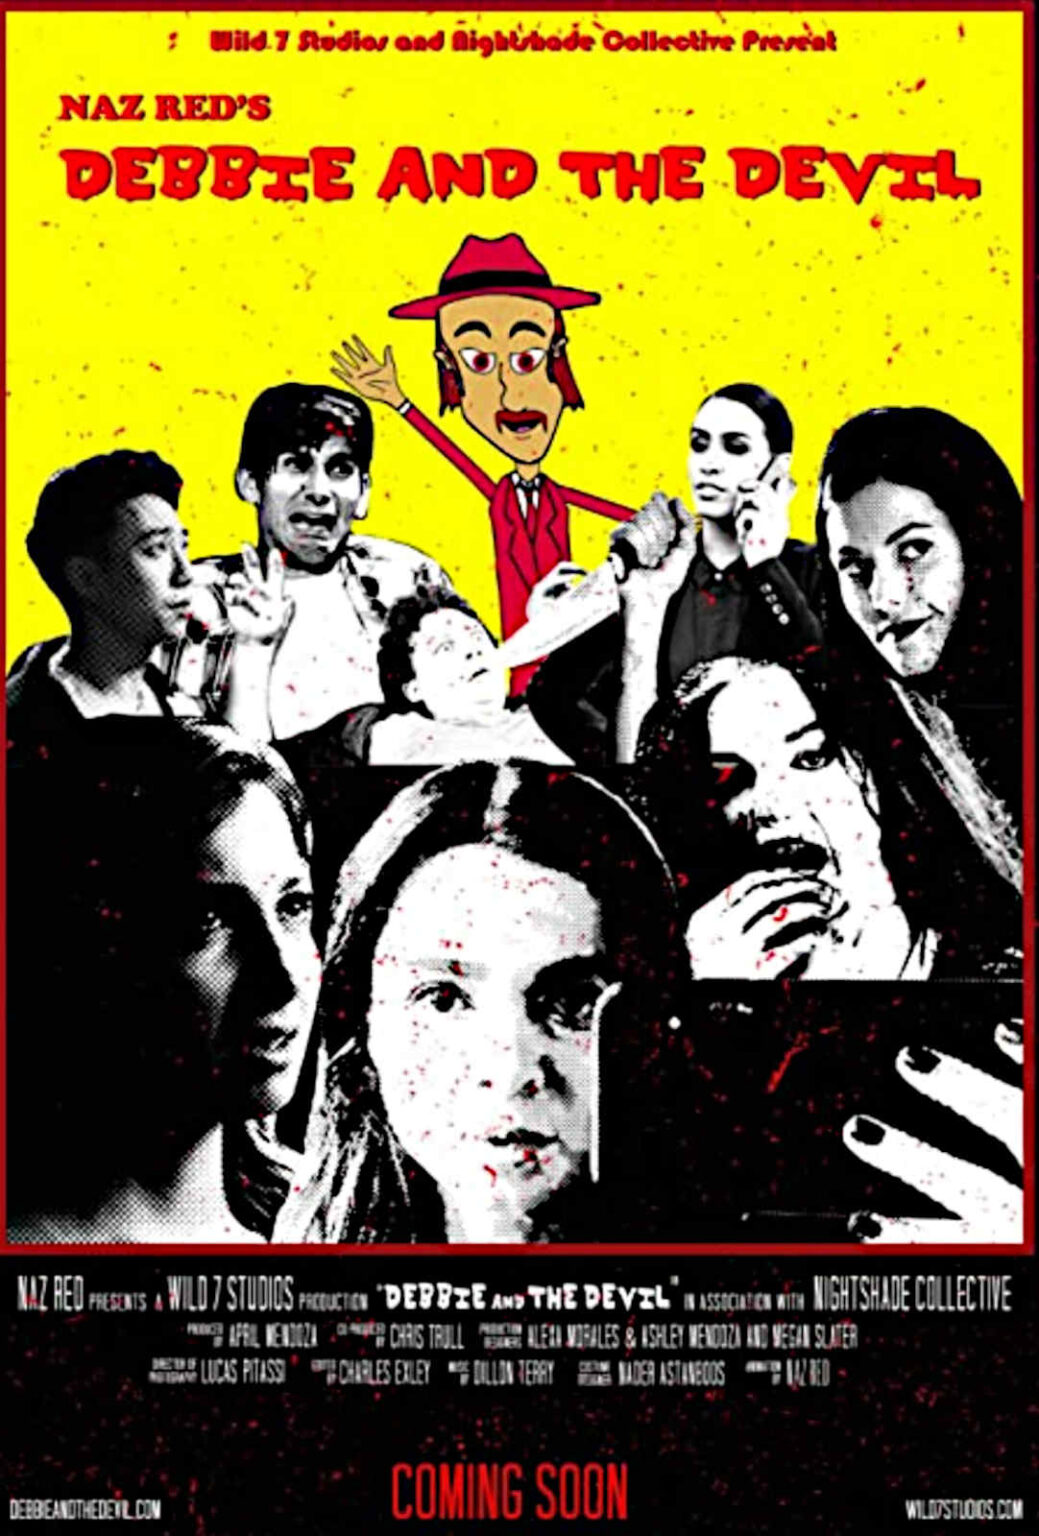 Looking At The New Horrorcomedy Mashup Debbie And The Devil And Its Exciting Lineup Of Cast